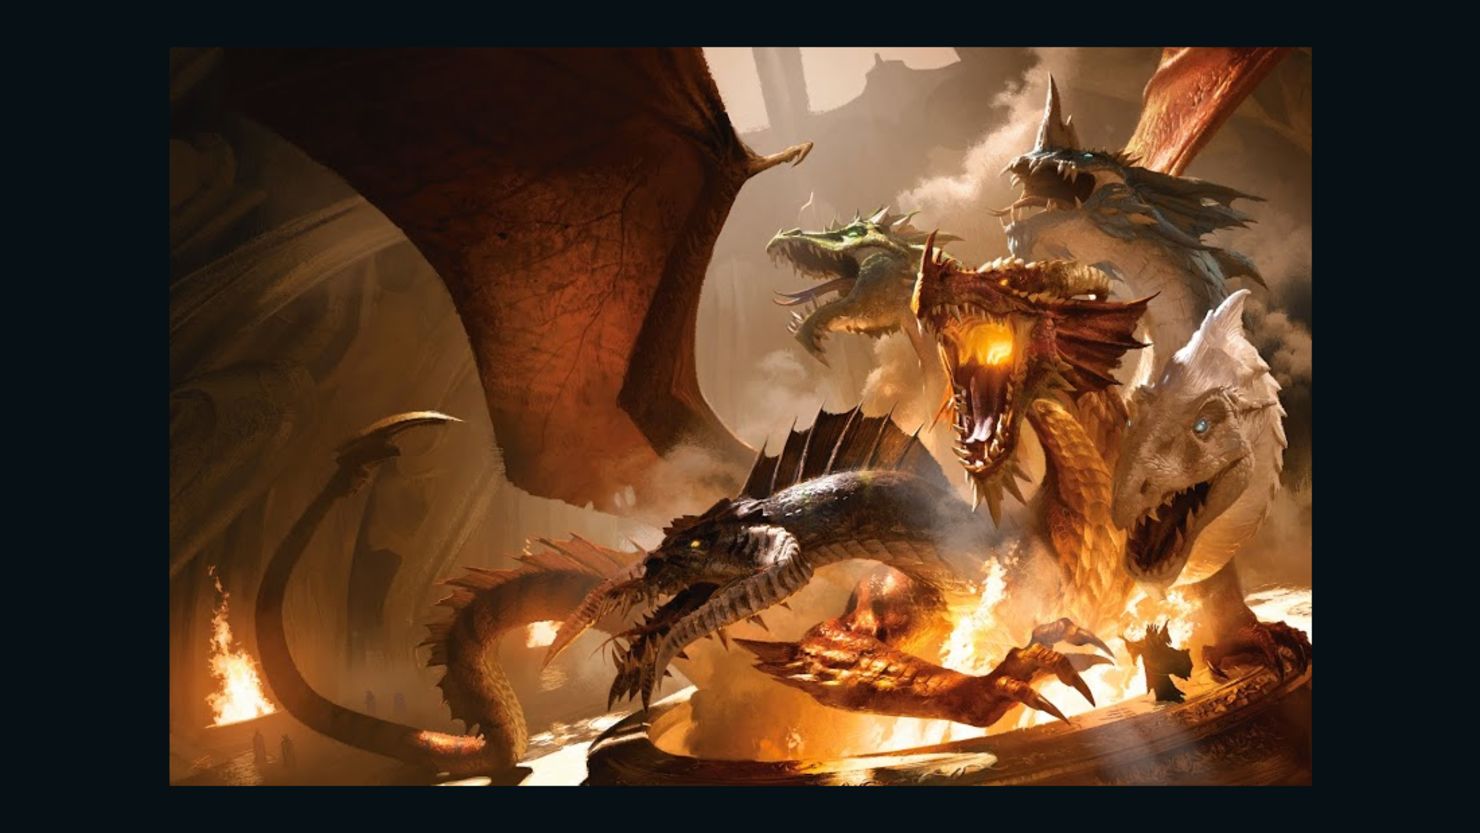 Tiamat, a classic "Dungeons & Dragons" monster, will feature heavily in the game's new tabletop and digital versions.